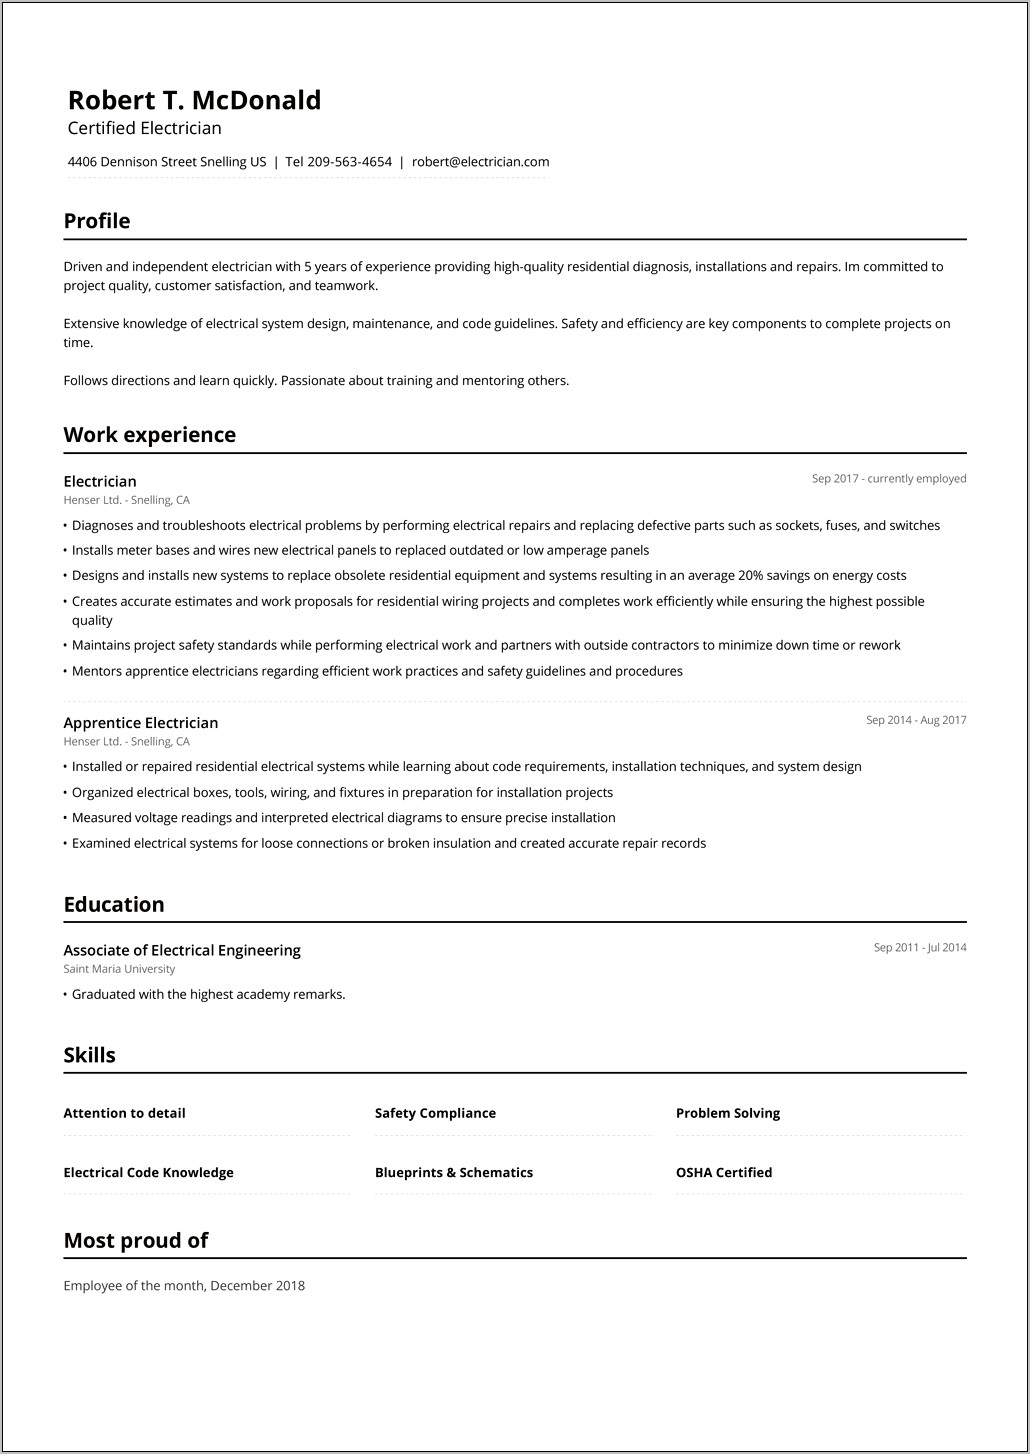 Resume Creator Free Online For High School Students